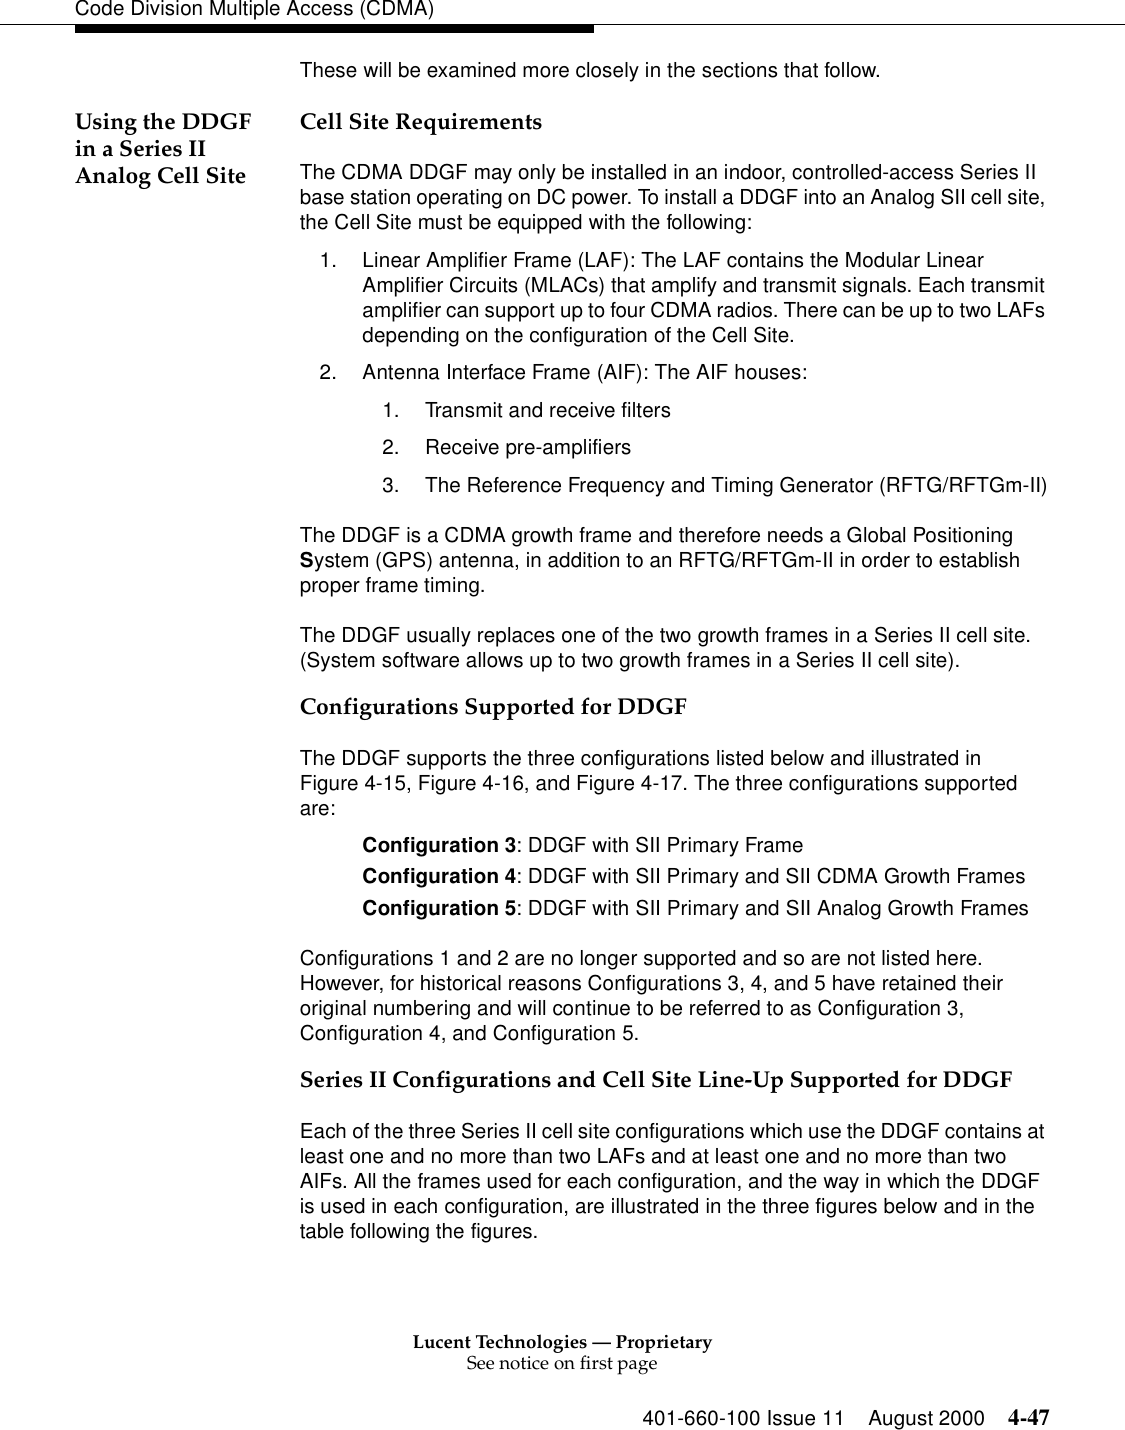 Lucent Technologies — ProprietarySee notice on first page401-660-100 Issue 11 August 2000 4-47Code Division Multiple Access (CDMA)These will be examined more closely in the sections that follow.Using the DDGF in a Series II Analog Cell SiteCell Site RequirementsThe CDMA DDGF may only be installed in an indoor, controlled-access Series II base station operating on DC power. To install a DDGF into an Analog SII cell site, the Cell Site must be equipped with the following: 1. Linear Amplifier Frame (LAF): The LAF contains the Modular Linear Amplifier Circuits (MLACs) that amplify and transmit signals. Each transmit amplifier can support up to four CDMA radios. There can be up to two LAFs depending on the configuration of the Cell Site.2. Antenna Interface Frame (AIF): The AIF houses:1. Transmit and receive filters2. Receive pre-amplifiers3. The Reference Frequency and Timing Generator (RFTG/RFTGm-II)The DDGF is a CDMA growth frame and therefore needs a Global Positioning System (GPS) antenna, in addition to an RFTG/RFTGm-II in order to establish proper frame timing. The DDGF usually replaces one of the two growth frames in a Series II cell site. (System software allows up to two growth frames in a Series II cell site). Configurations Supported for DDGFThe DDGF supports the three configurations listed below and illustrated in Figure 4-15, Figure 4-16, and Figure 4-17. The three configurations supported are:Configuration 3: DDGF with SII Primary FrameConfiguration 4: DDGF with SII Primary and SII CDMA Growth FramesConfiguration 5: DDGF with SII Primary and SII Analog Growth FramesConfigurations 1 and 2 are no longer supported and so are not listed here. However, for historical reasons Configurations 3, 4, and 5 have retained their original numbering and will continue to be referred to as Configuration 3, Configuration 4, and Configuration 5. Series II Configurations and Cell Site Line-Up Supported for DDGFEach of the three Series II cell site configurations which use the DDGF contains at least one and no more than two LAFs and at least one and no more than two AIFs. All the frames used for each configuration, and the way in which the DDGF is used in each configuration, are illustrated in the three figures below and in the table following the figures.